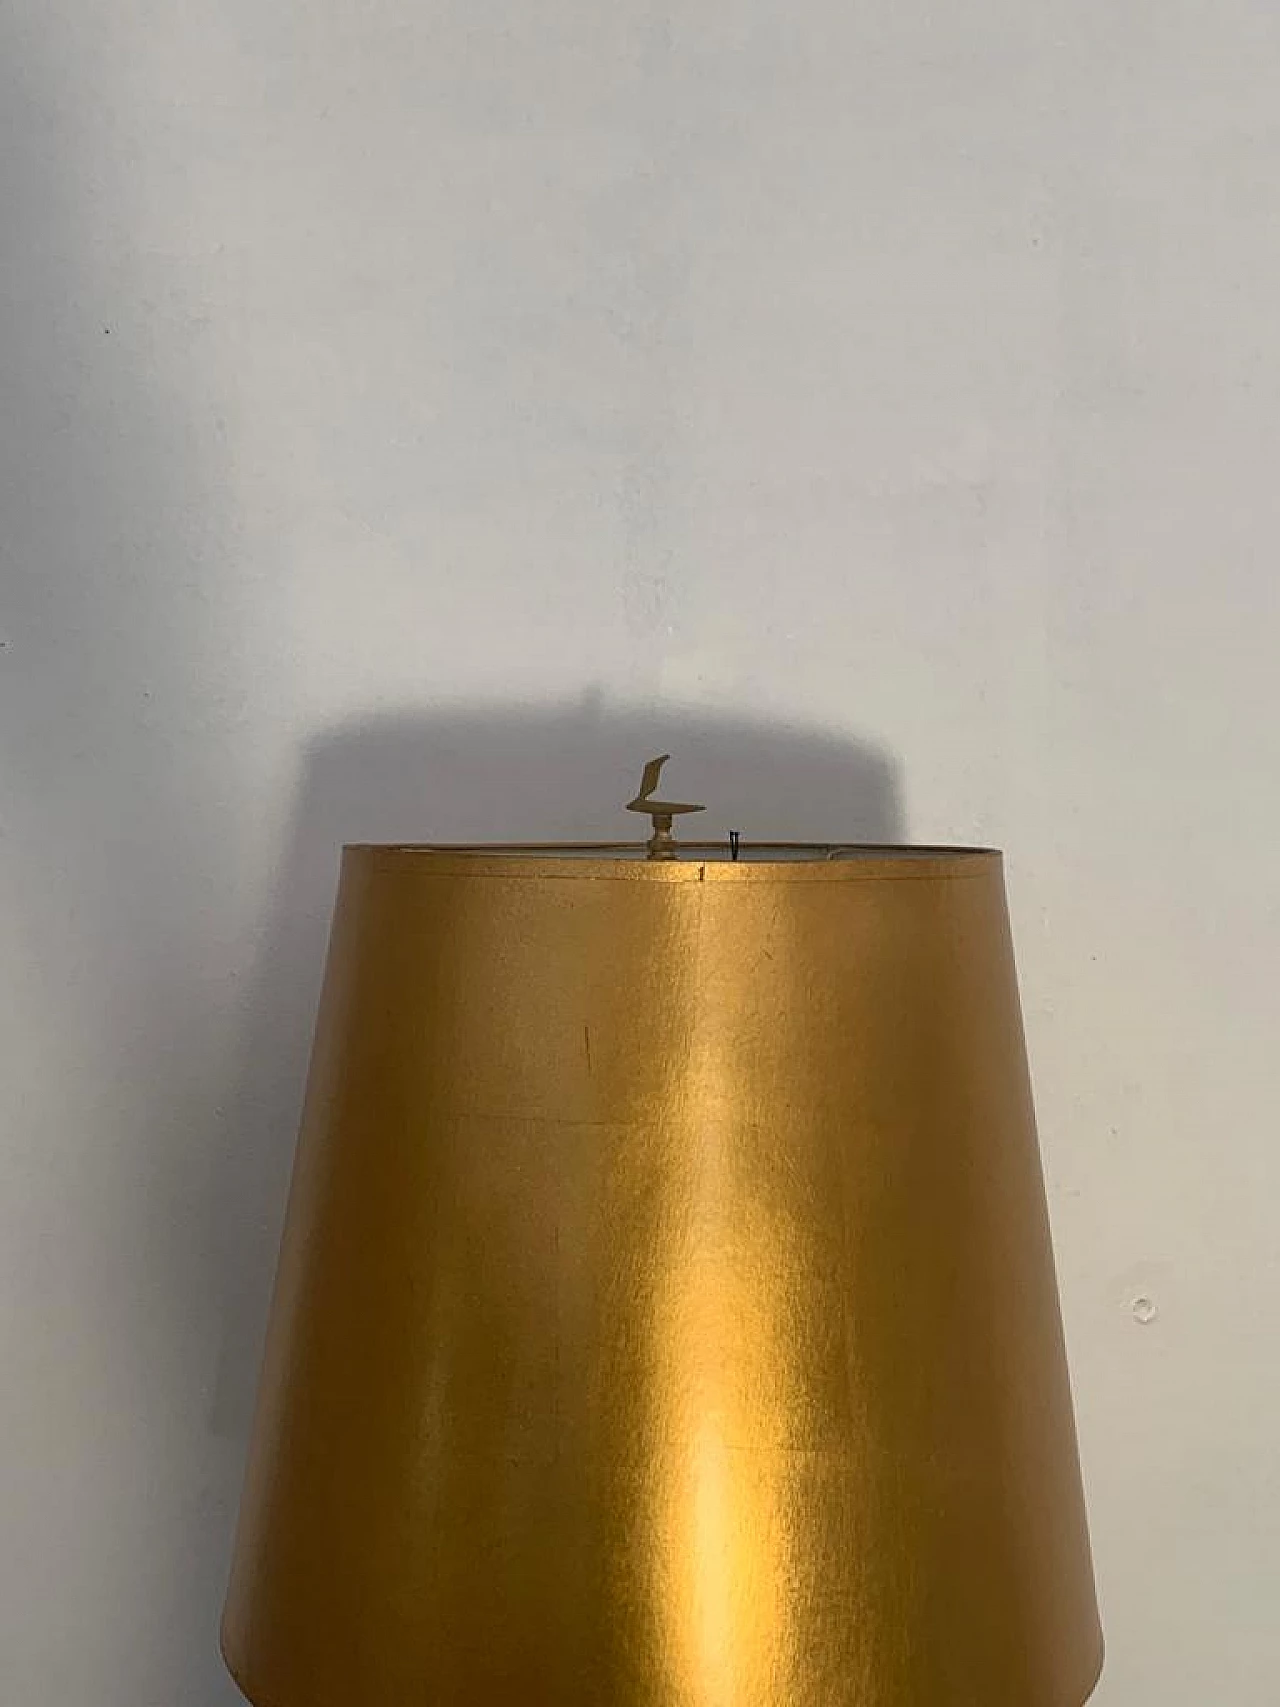 George table lamp by Leeazane for Lam Lee Group Dallas, 1990s 1197677